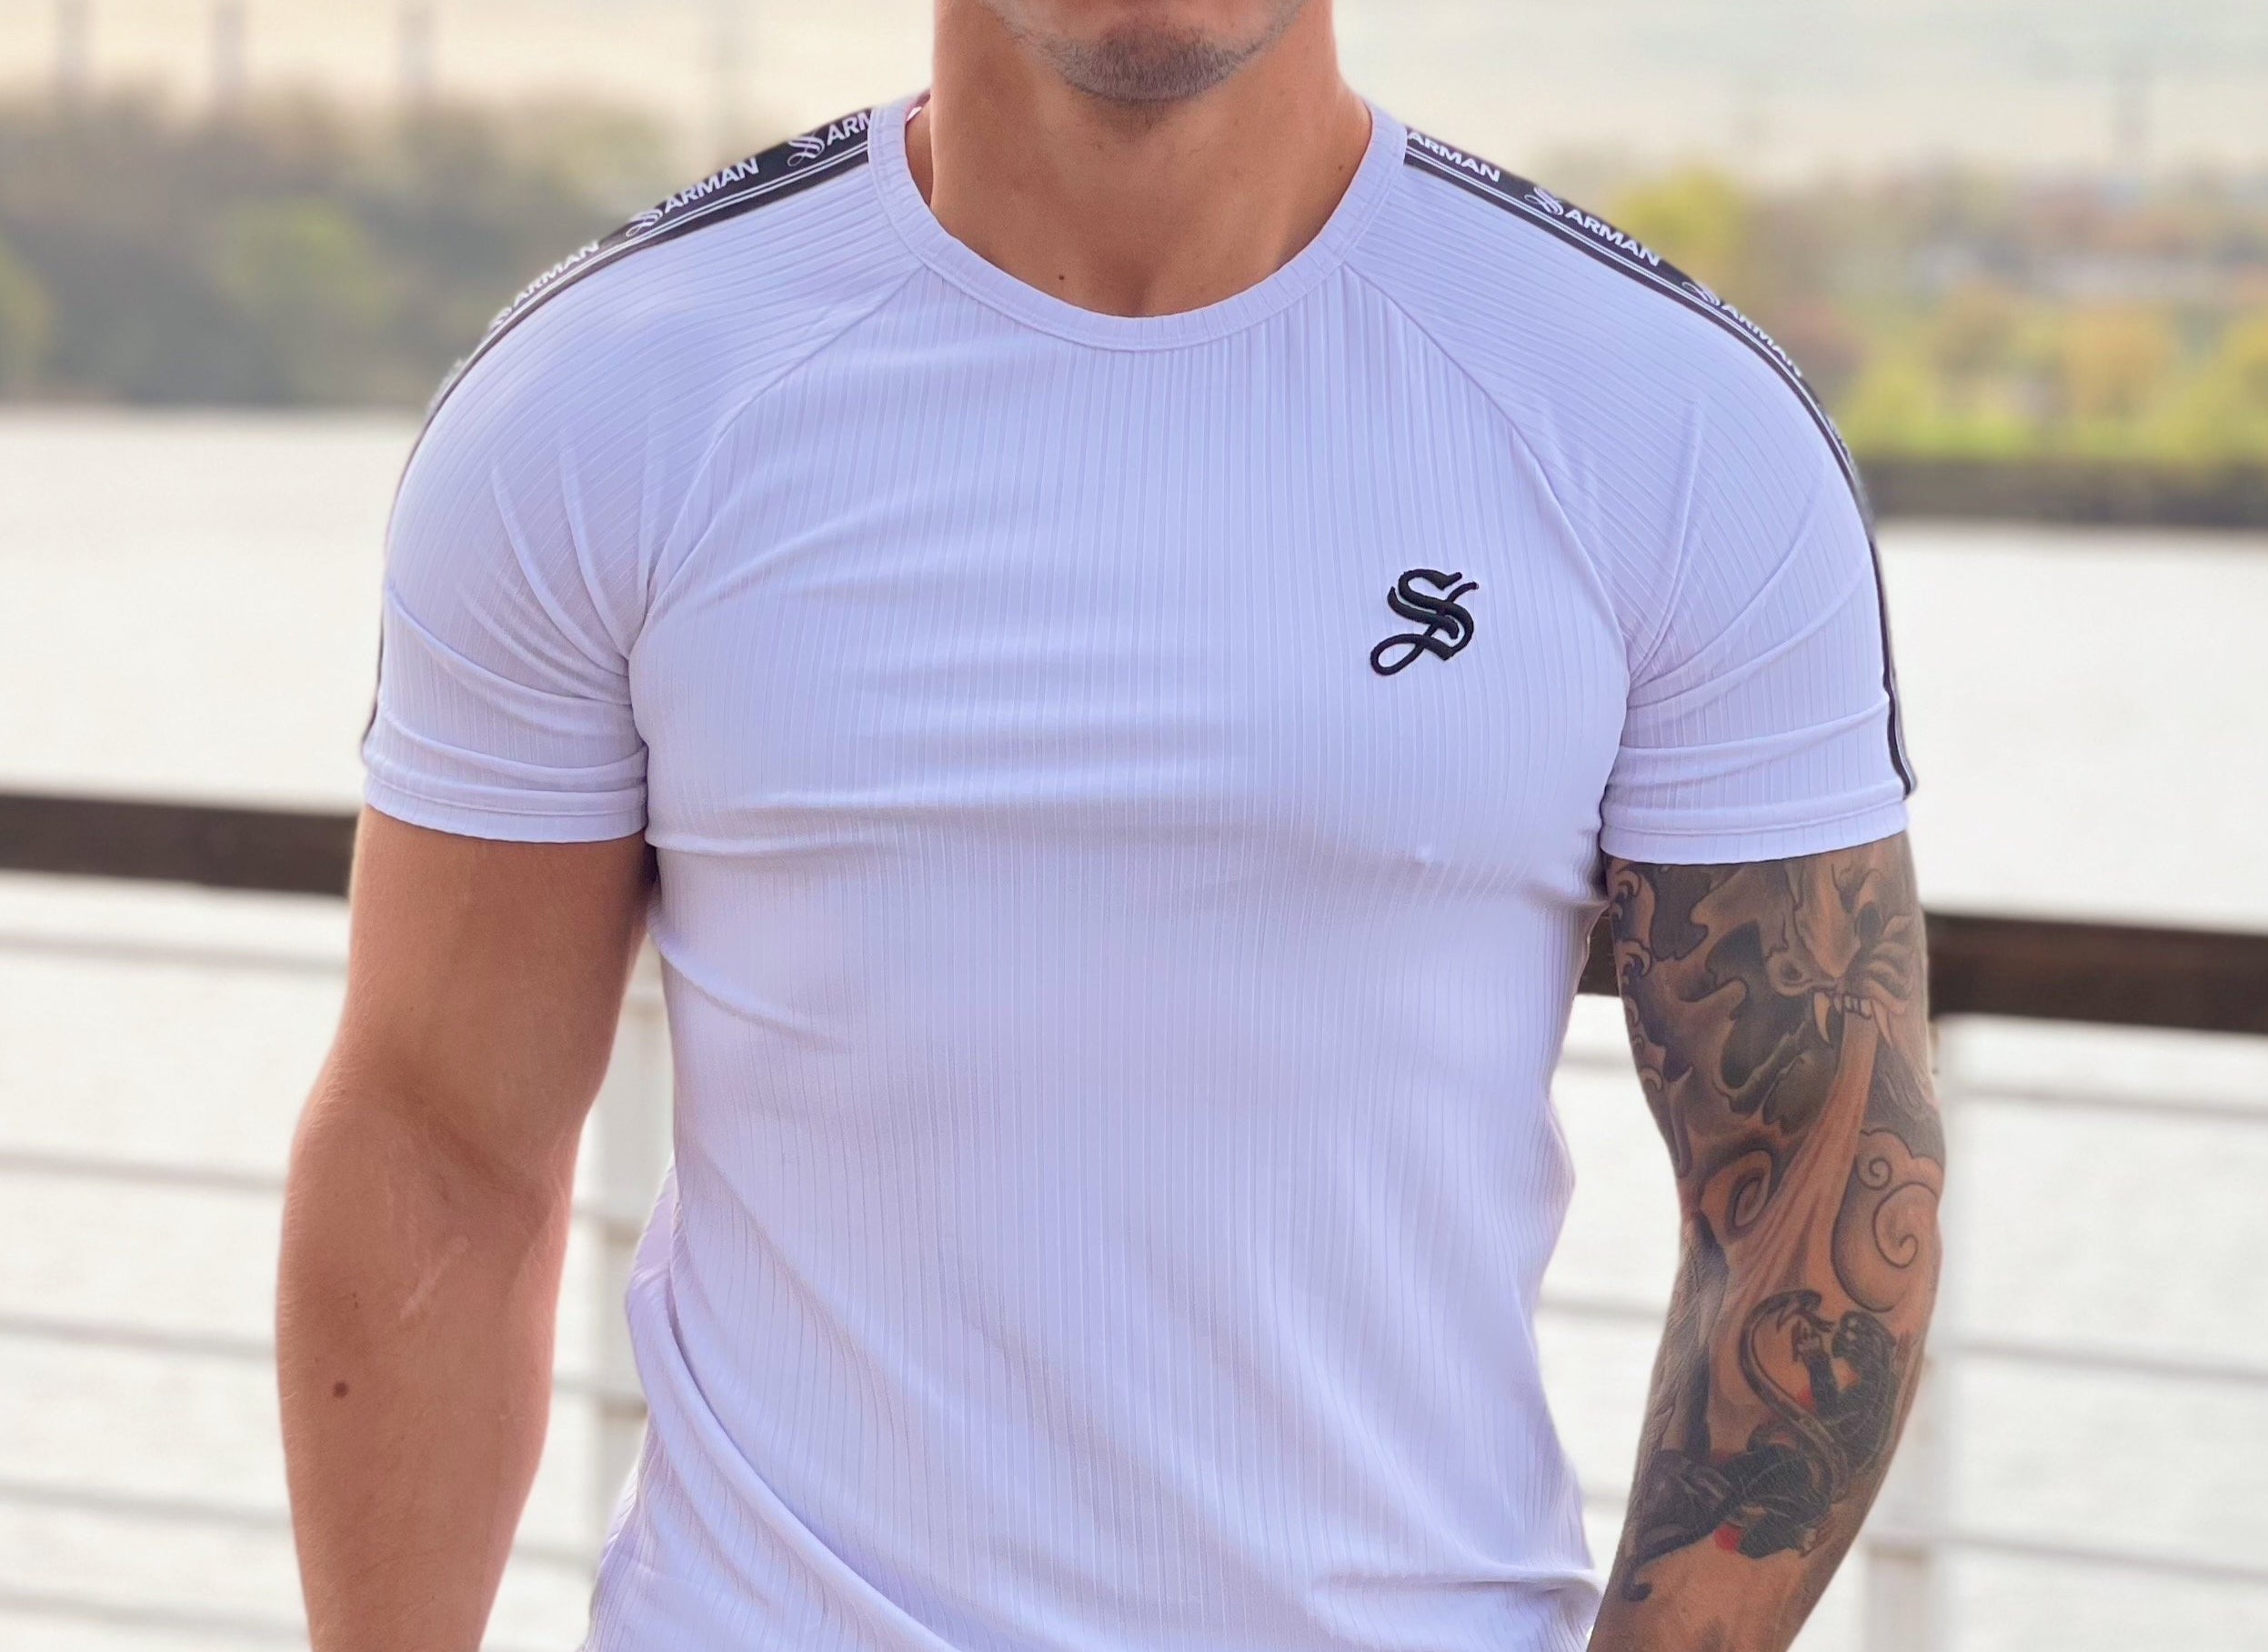 One Half #2 - White T-shirt for Men - Sarman Fashion - Wholesale Clothing Fashion Brand for Men from Canada